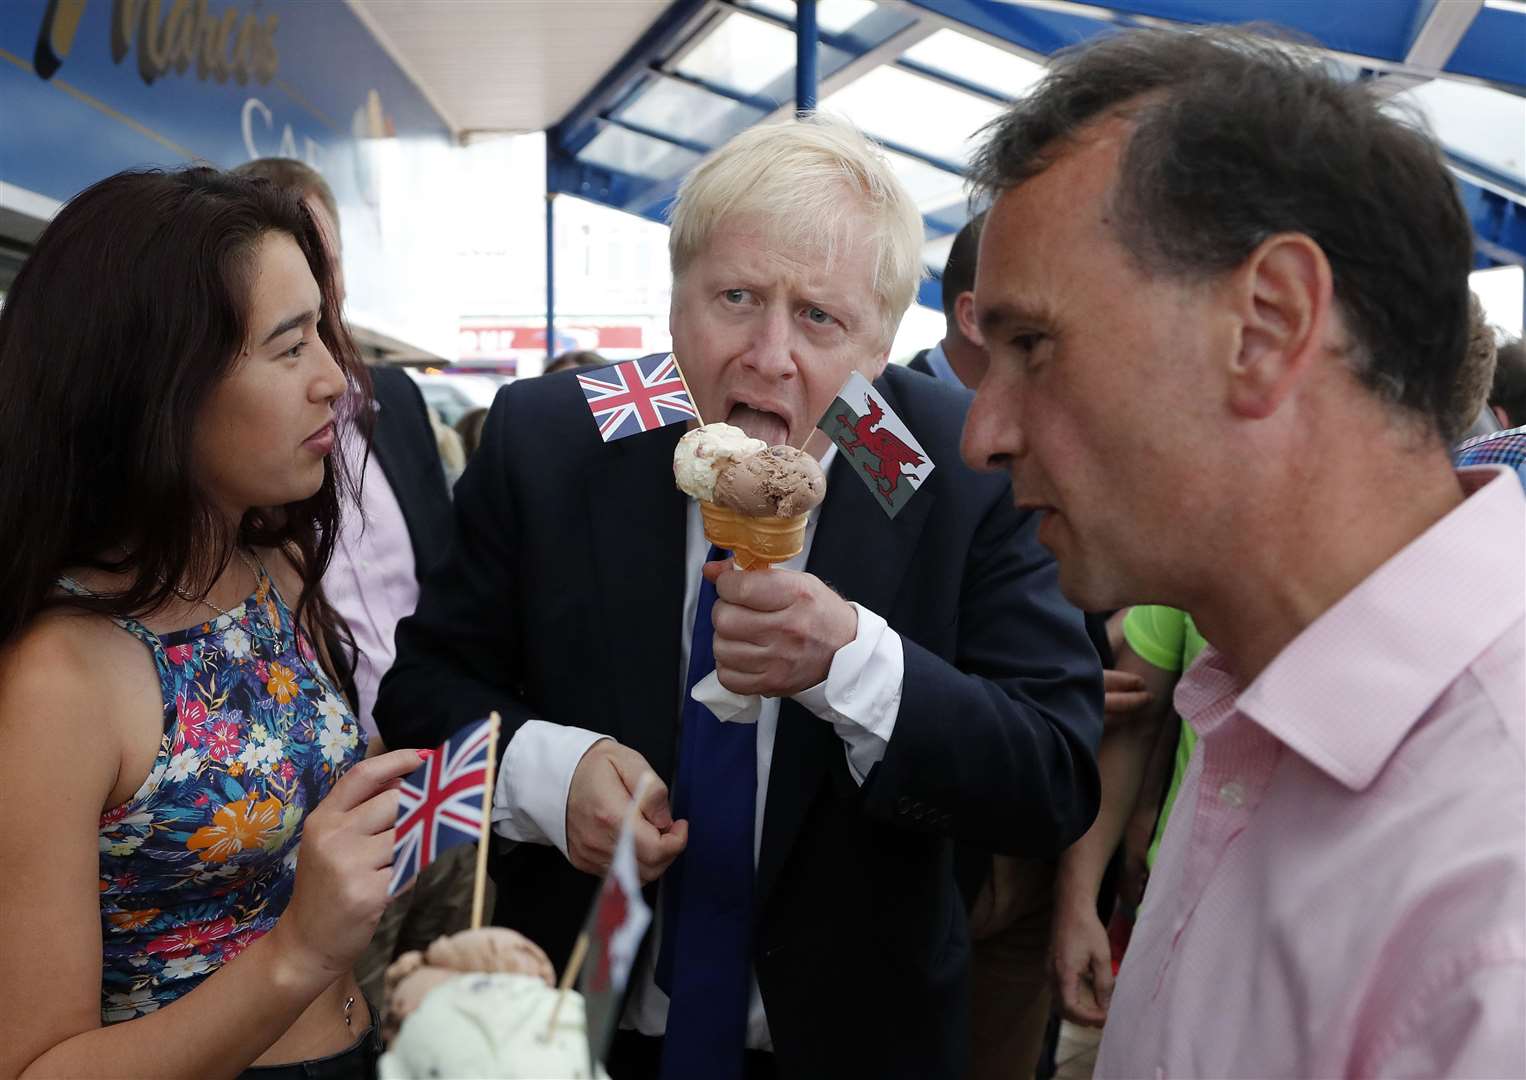 An ice cream stop in Barry, South Wales during the leadership campaign (Frank Augstein/PA)